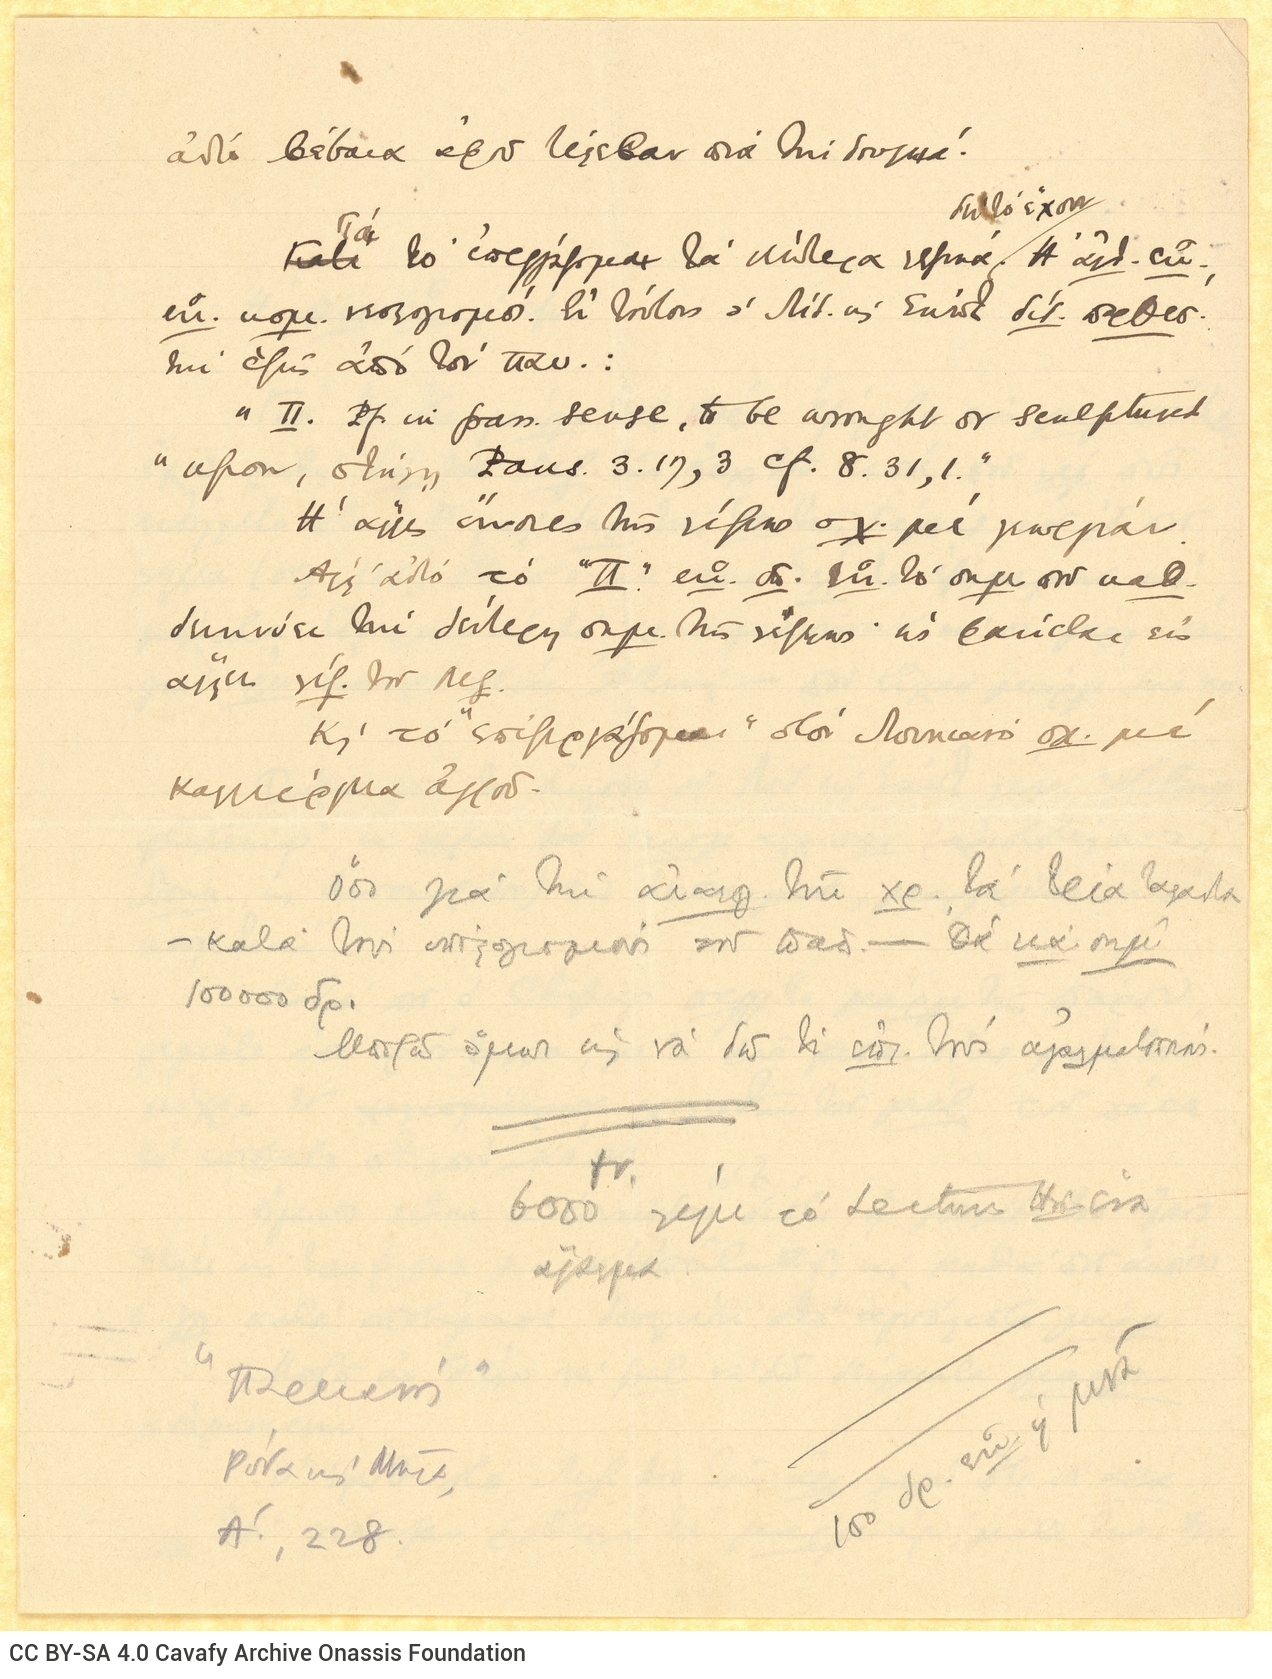 Handwritten notes in ink on the first and third pages of a ruled double sheet notepaer. Note in pencil at the bottom of th